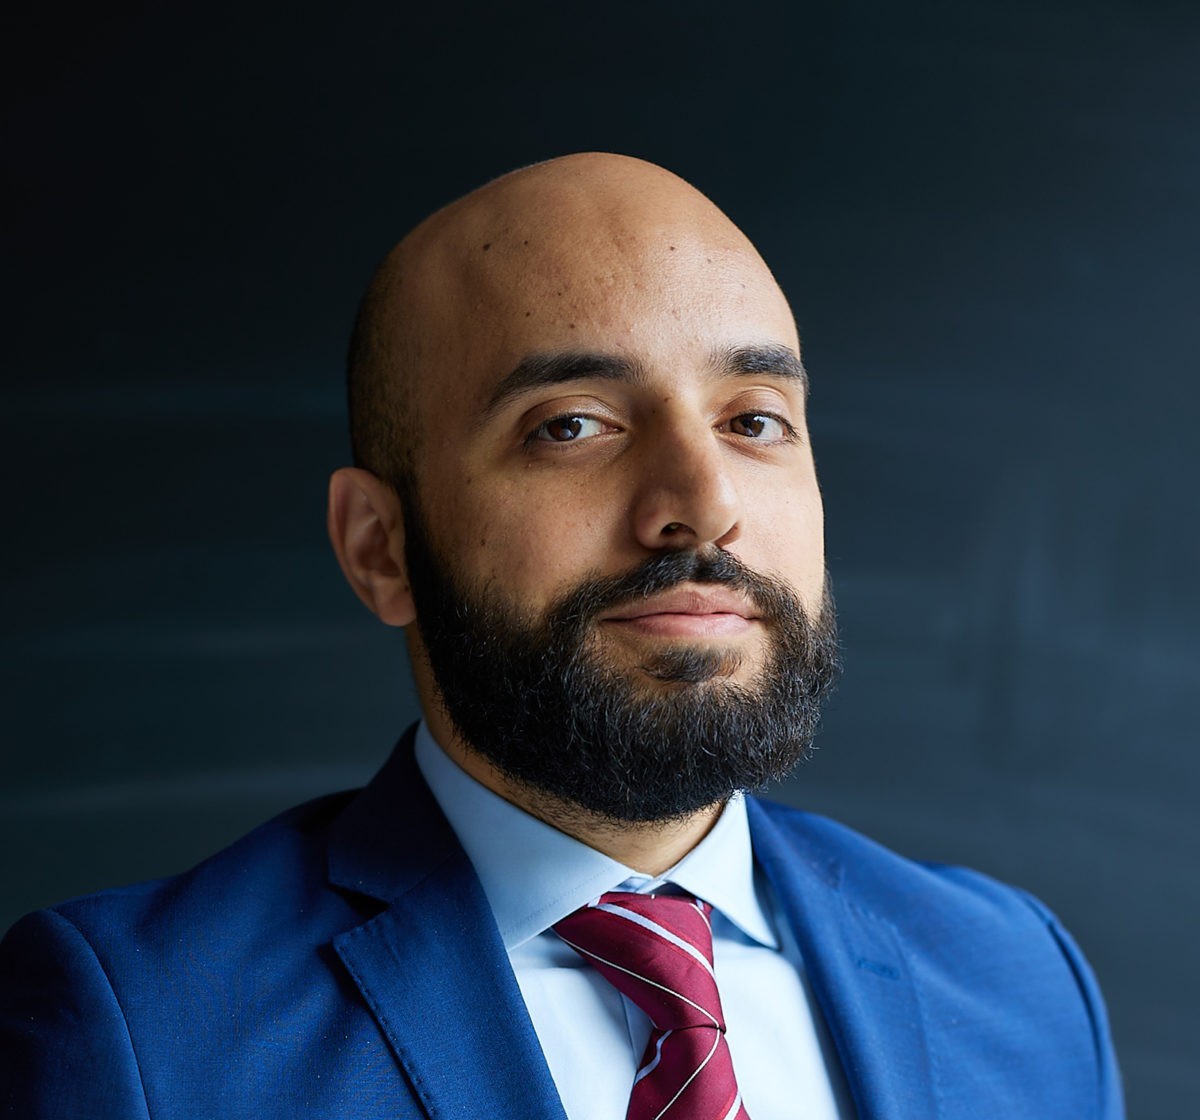 Ramy Shelbaya, Co-founder and CEO, Quantum Dice will speak on “Policy and Market Factors Shaping the QKD/QRNG Market” at IQT Quantum Cybersecurity in NYC October 25-27